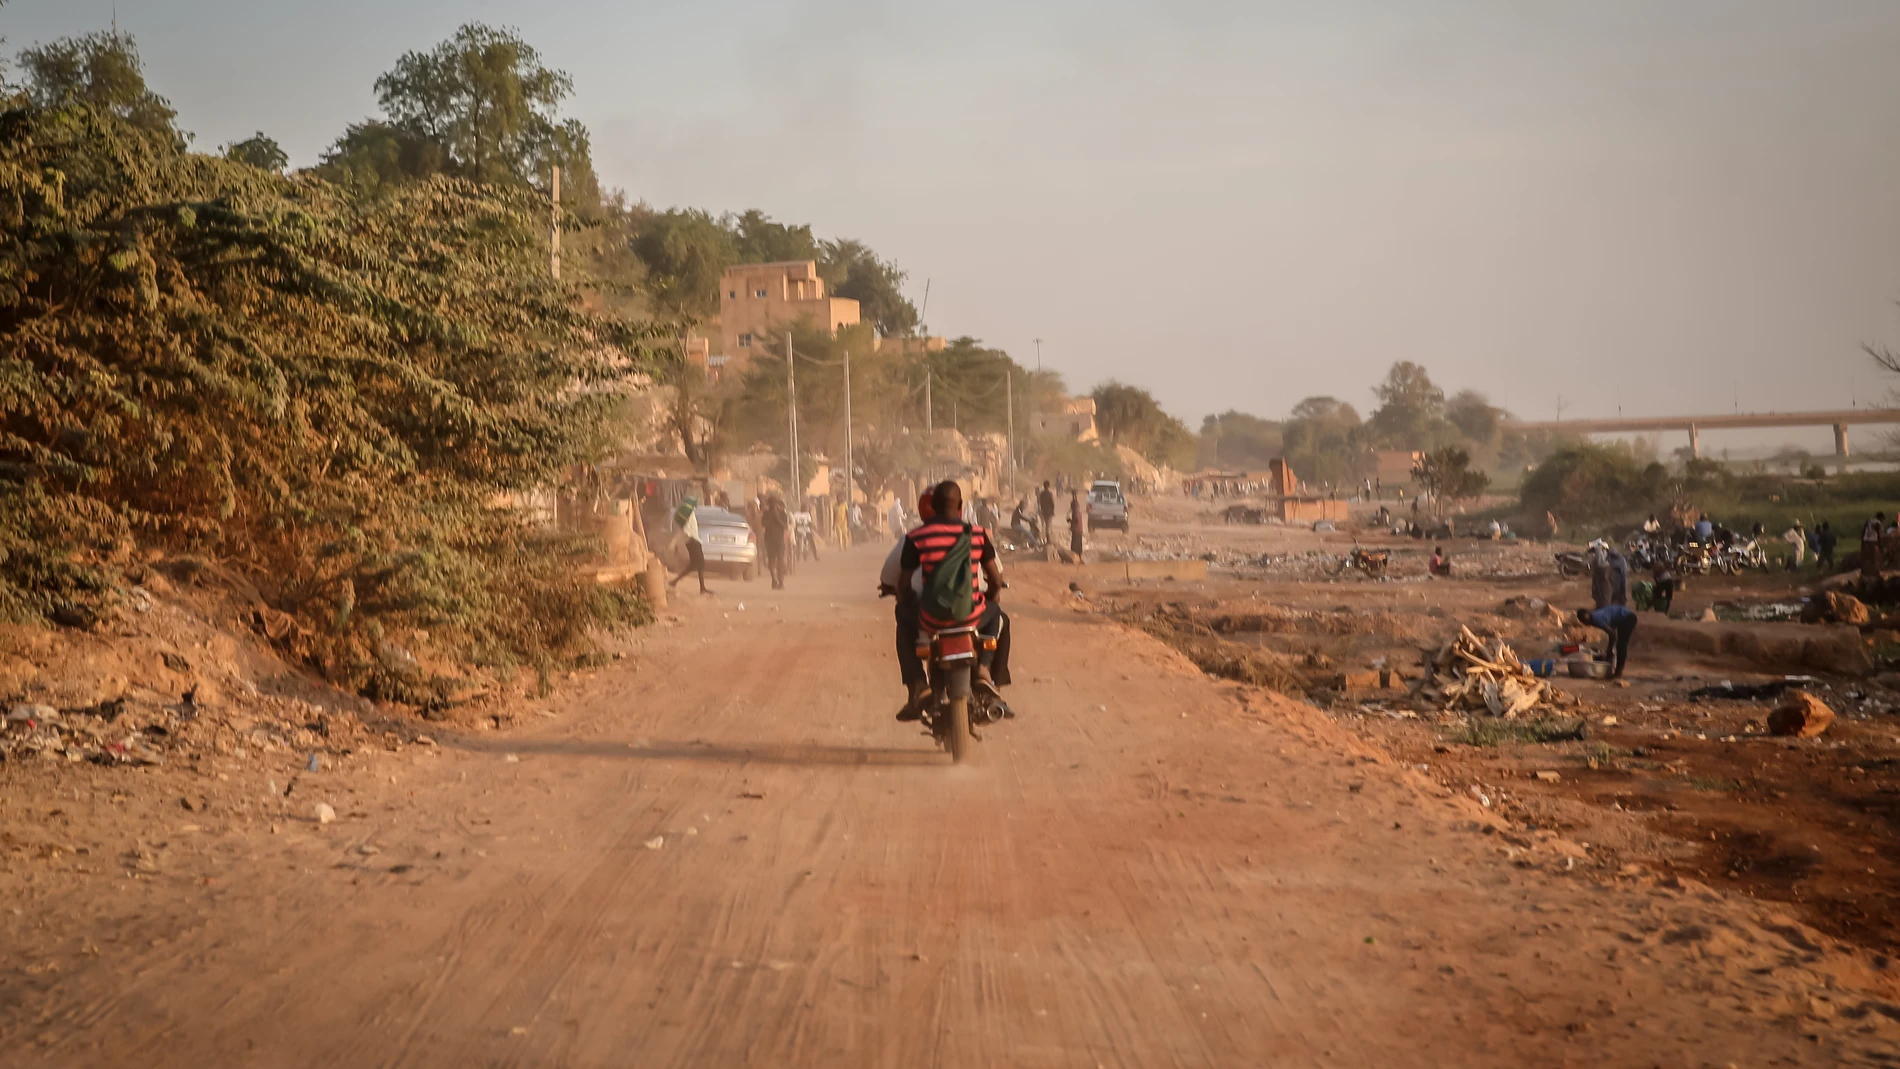 January 21, 2023, Niamey, Niger: A motorbike rides along the banks of the Niger River in Niamey. Niger a landlocked West African country of roughly 25 million people - is one of the poorest countries in the world. (Foto de ARCHIVO)21/01/2023